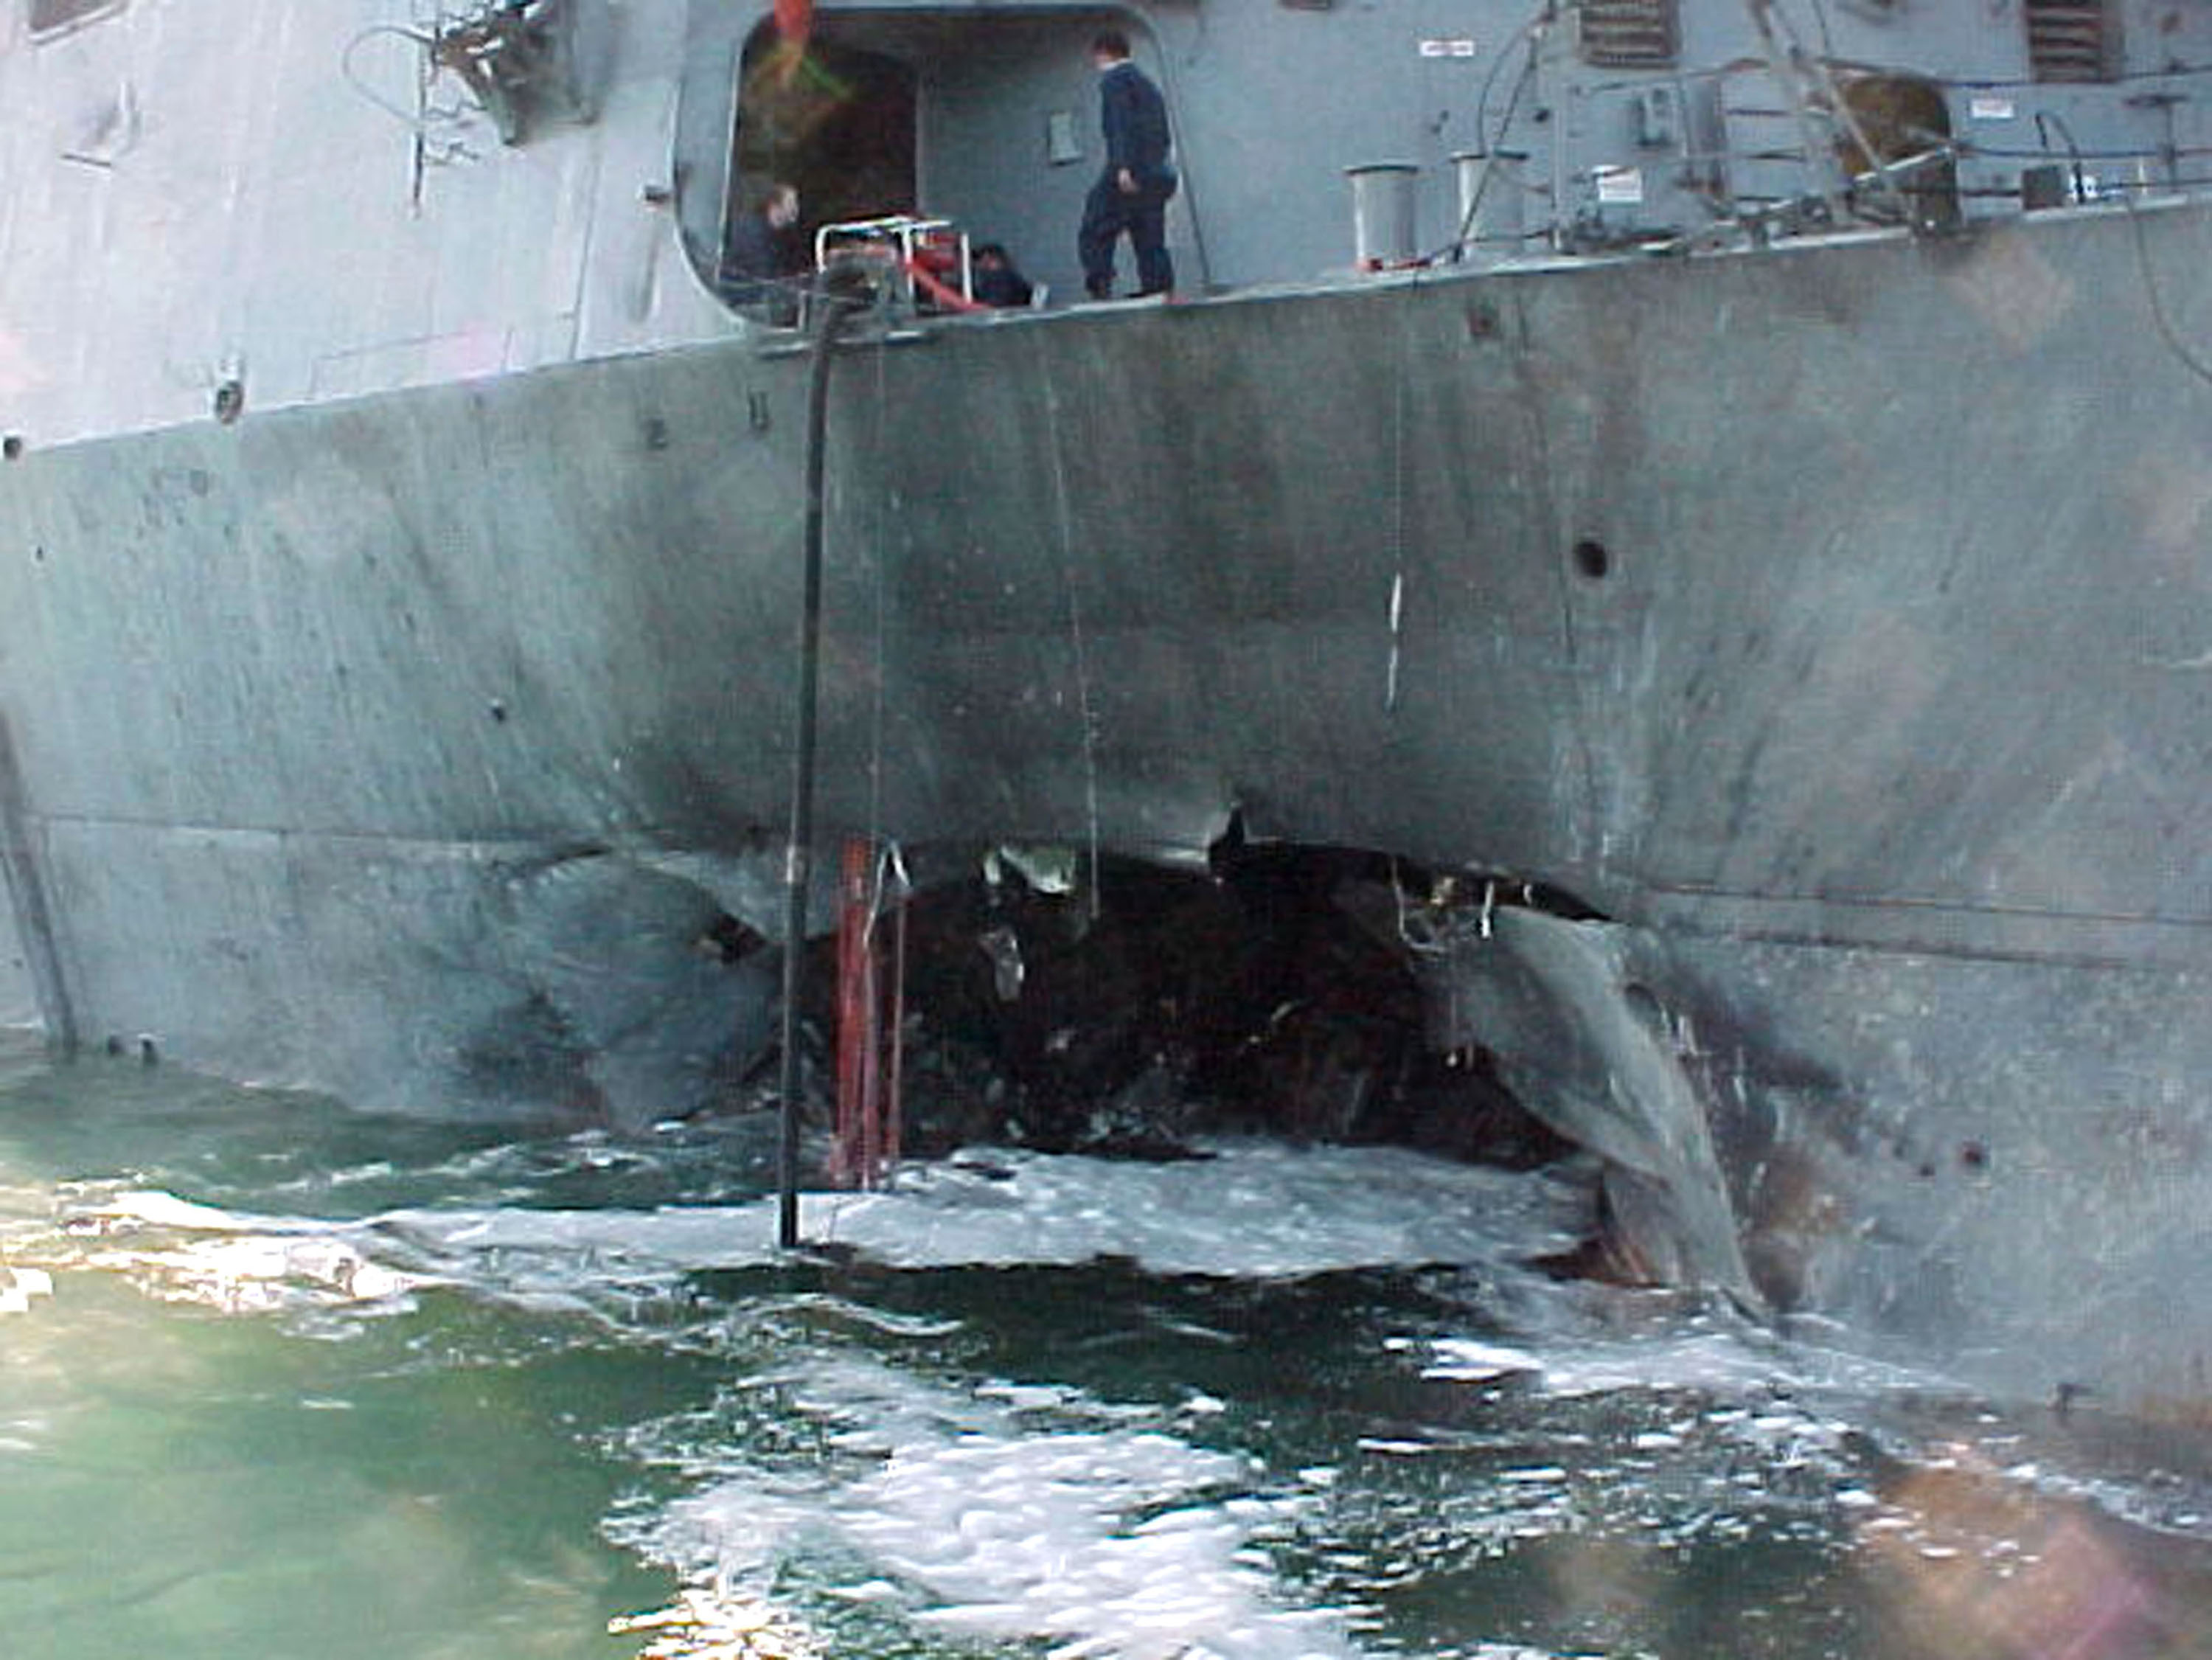 A gaping hole mars the port side of the Arleigh Burke class guided missile destroyer USS Cole after a terrorist bomb exploded and killed 17 U.S. sailors and injured approximately 36 others during a refueling operation October 12, 2000 in the port of Aden, Yemen. Al-Qaeda's chief of Persian Gulf operations, Abd al-Rahim al-Nashiri, also known as "Al Maqqi," has been captured, U.S. government officials said November 21, 2002. Al-Nashiri is believed to have been involved in planning numerous attacks, including the bombing of the USS Cole in Yemen, officials said. (Photo Courtesy of U.S. Navy/Getty Images)